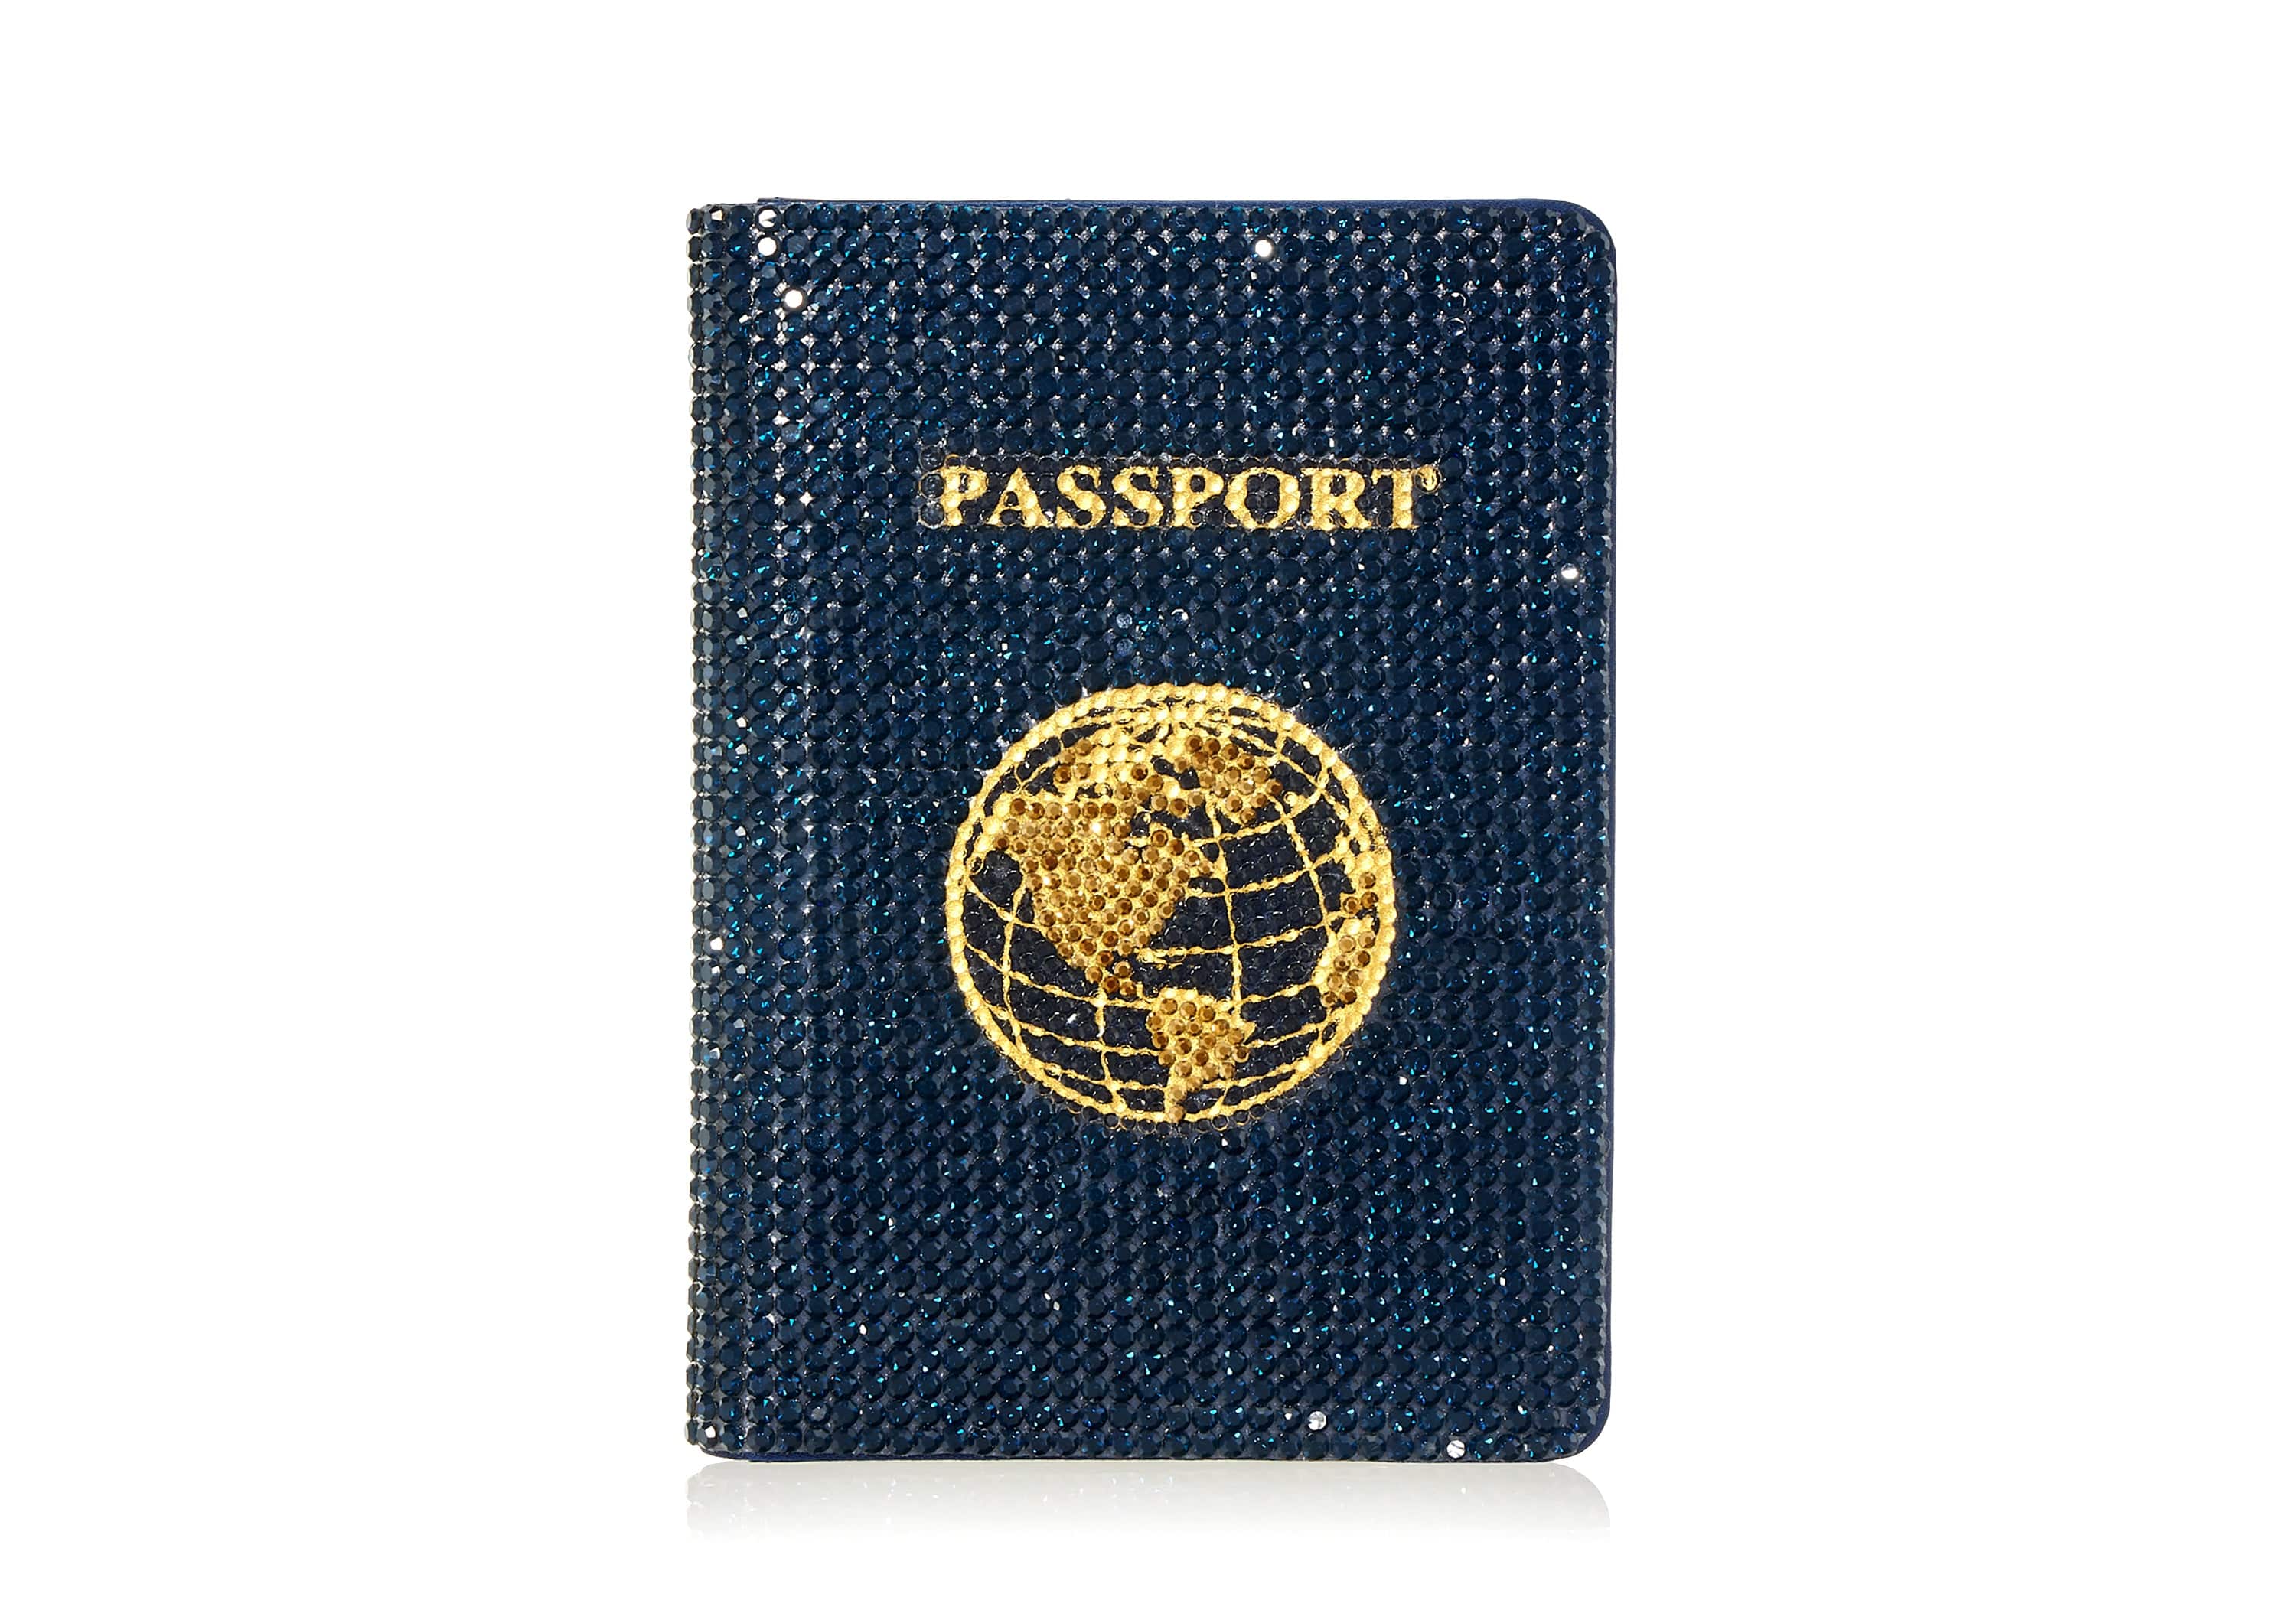 Custom Passport Covers, Travel In Style, Unique Designs, Gifts